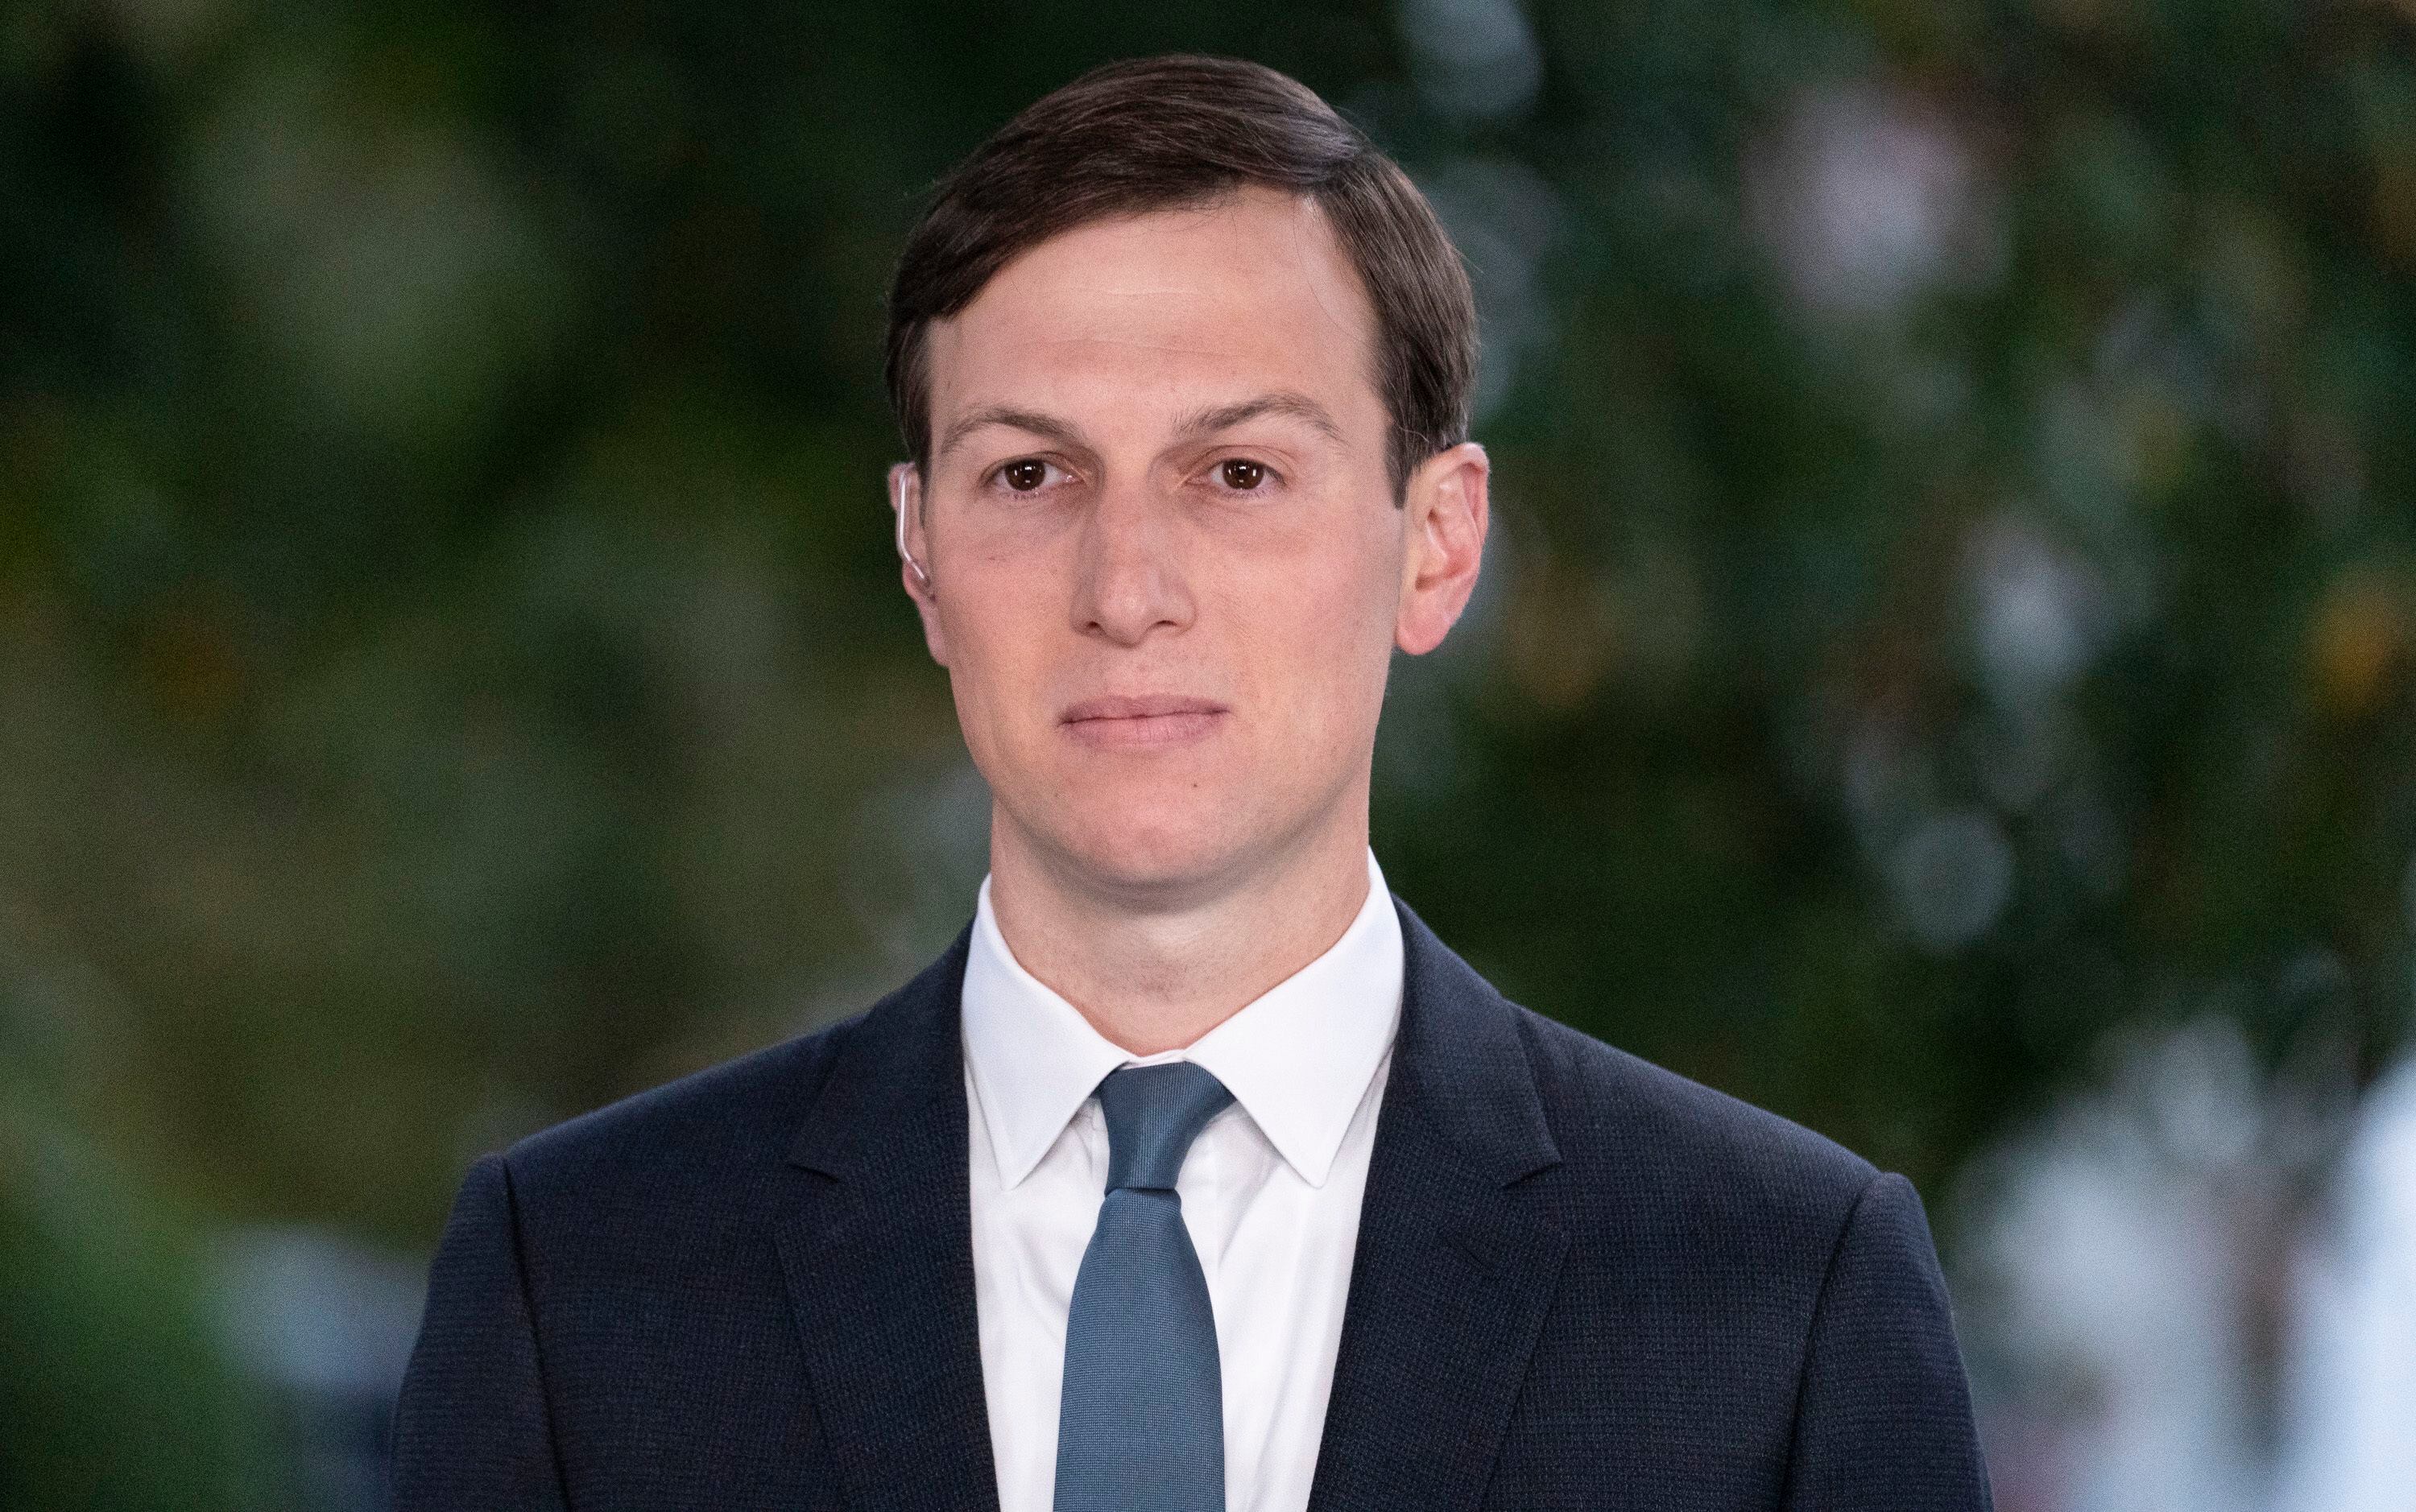 Jared Kushner has book deal, publication expected in 2022